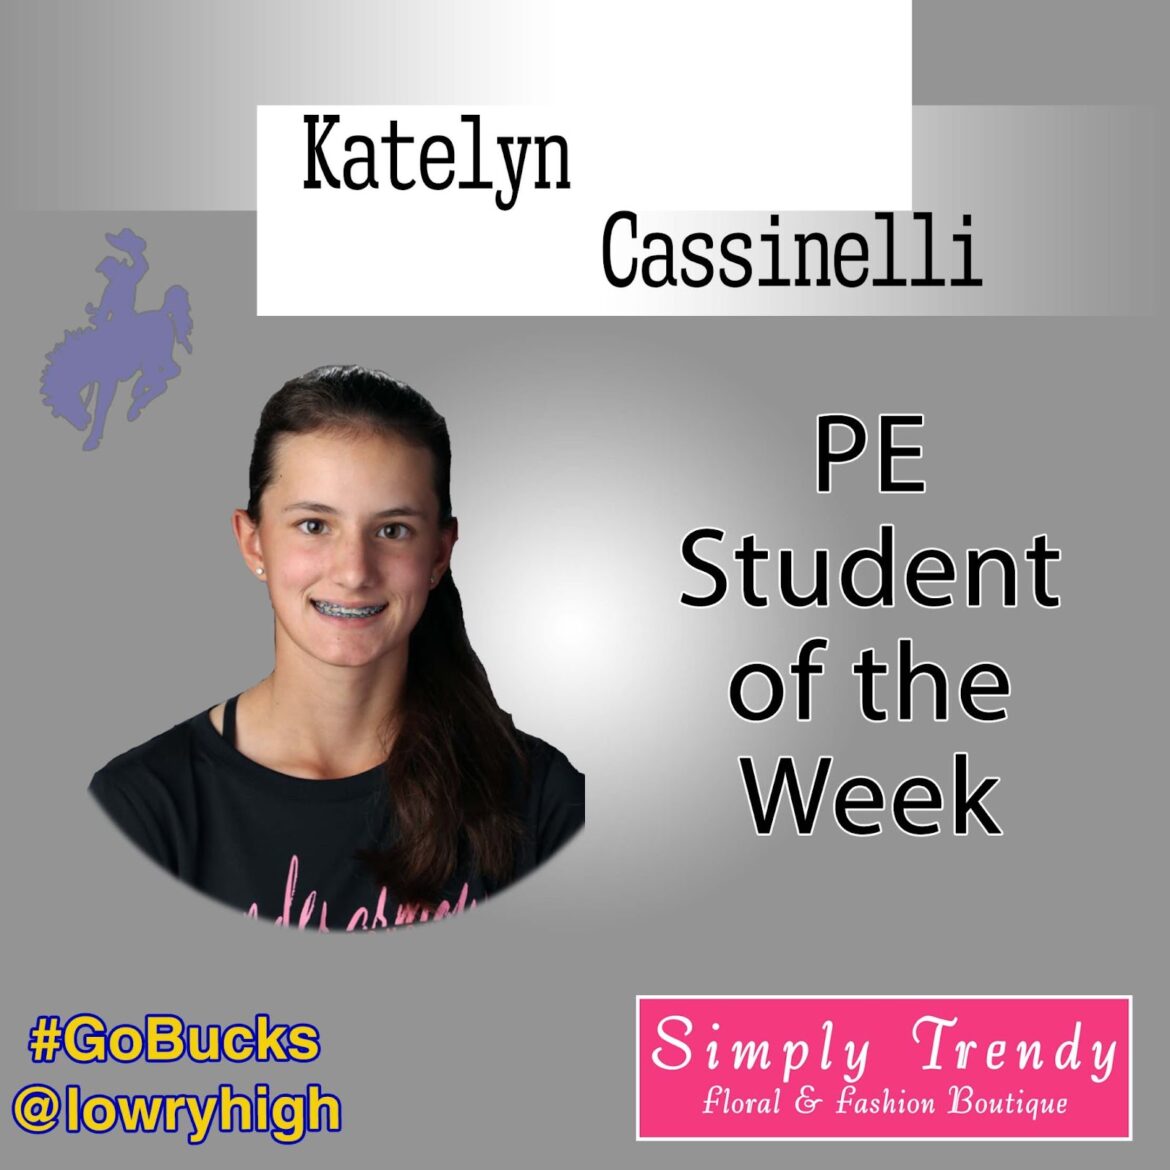 PE Student of the Week: Katelyn Cassinelli